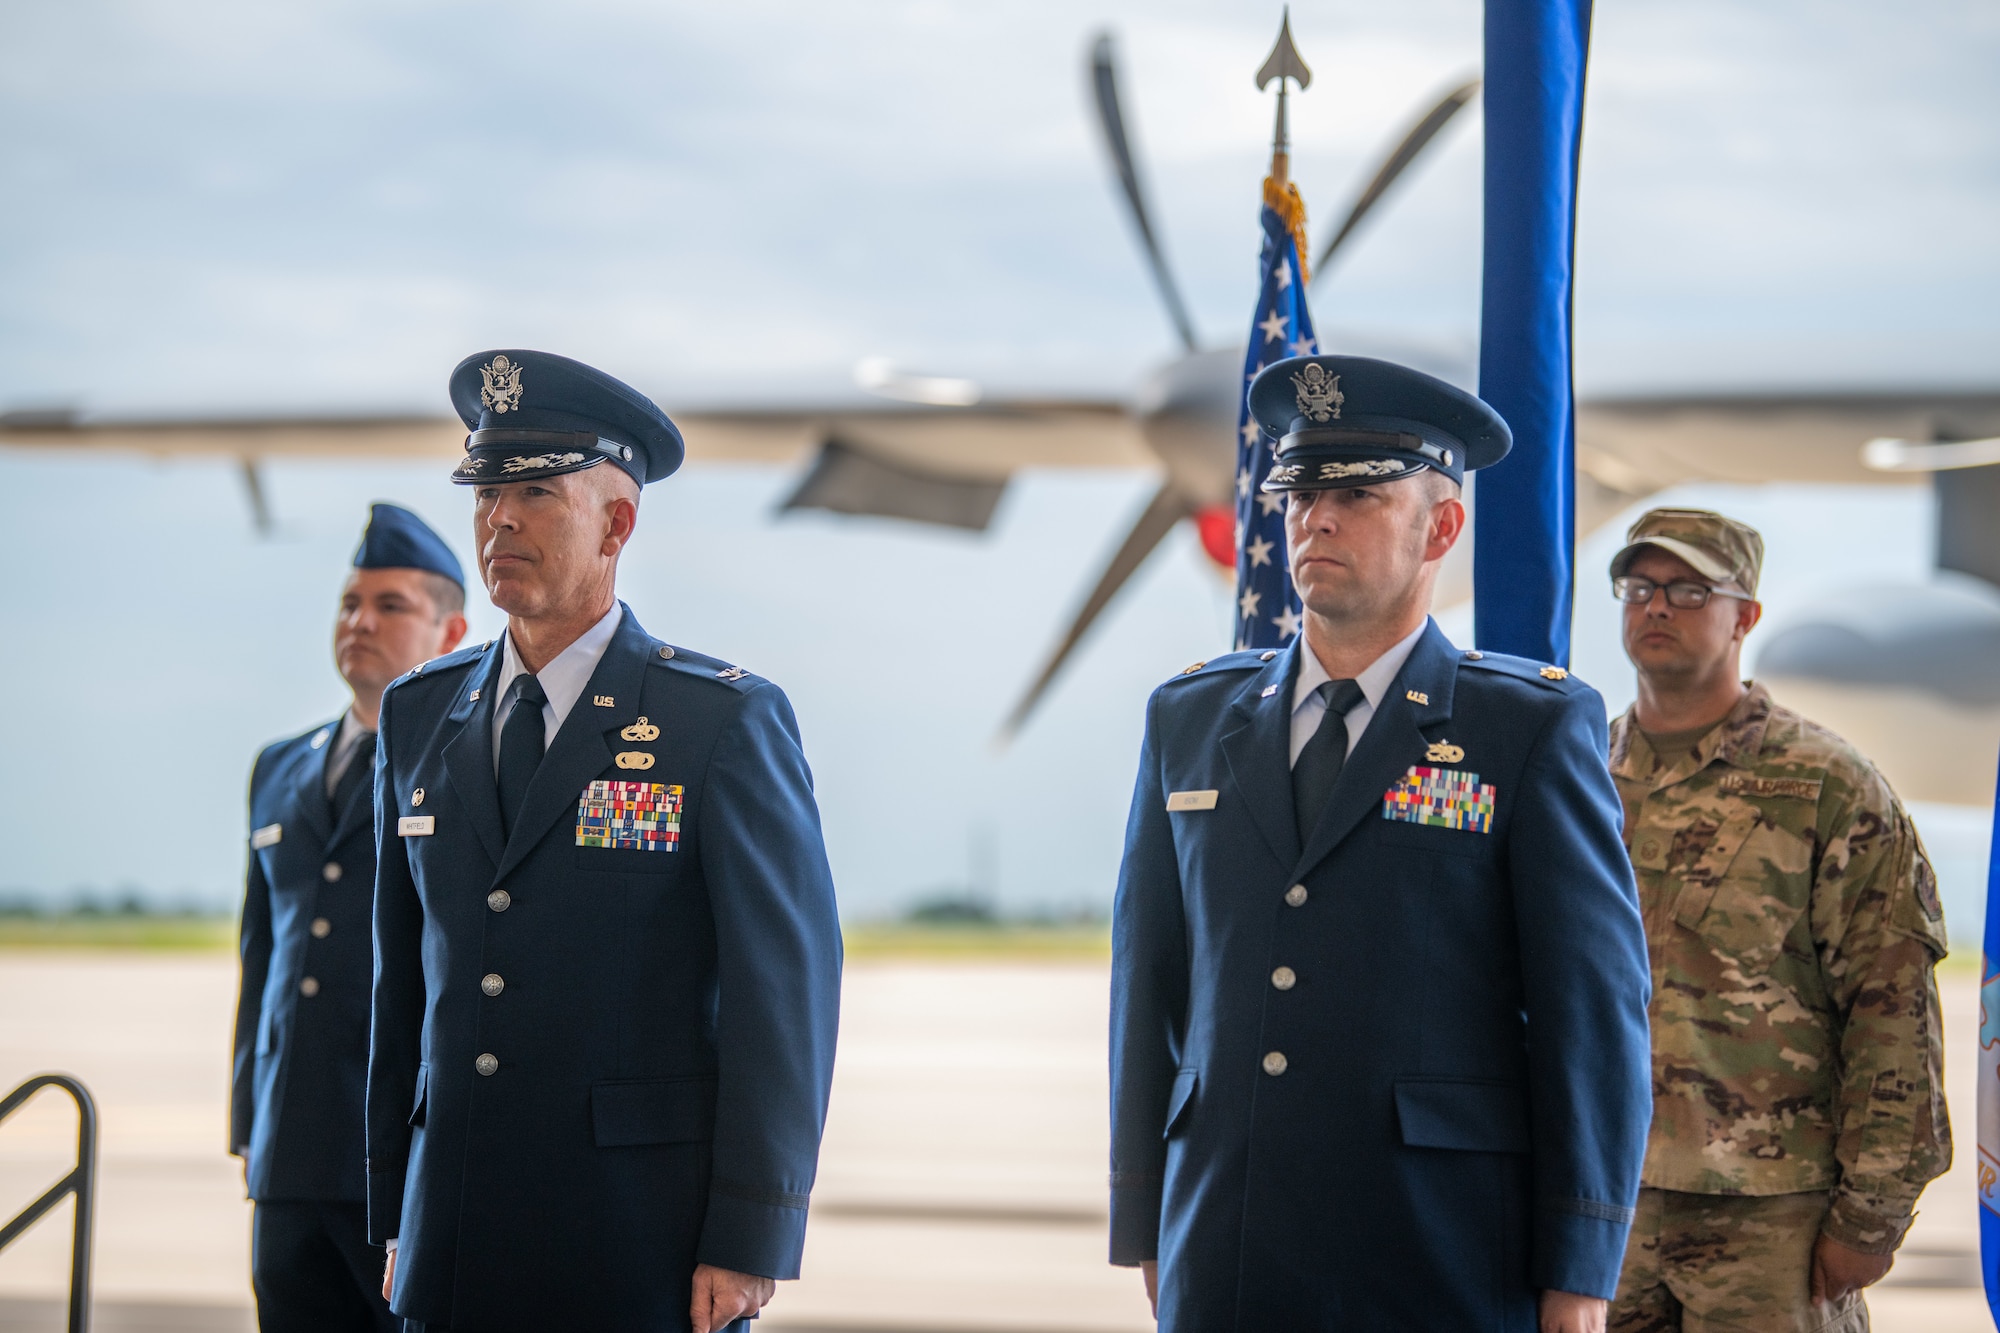 U.S. Air Force Col. Bernabe Whitfield, 27th Special Operations Maintenance Squadron commander, and U.S. Air Force Maj. Joshua Isom, 27th Special Operations Munitions Squadron commander stand for the squadron activation ceremony at Cannon Air Force Base, N.M., July 27, 2021. The 27 SOMUNS was activated recently to align with the Air Force Special Operations Command's strategic focus. (U.S. Air Force photo by Senior Airman Marcel D. Williams)